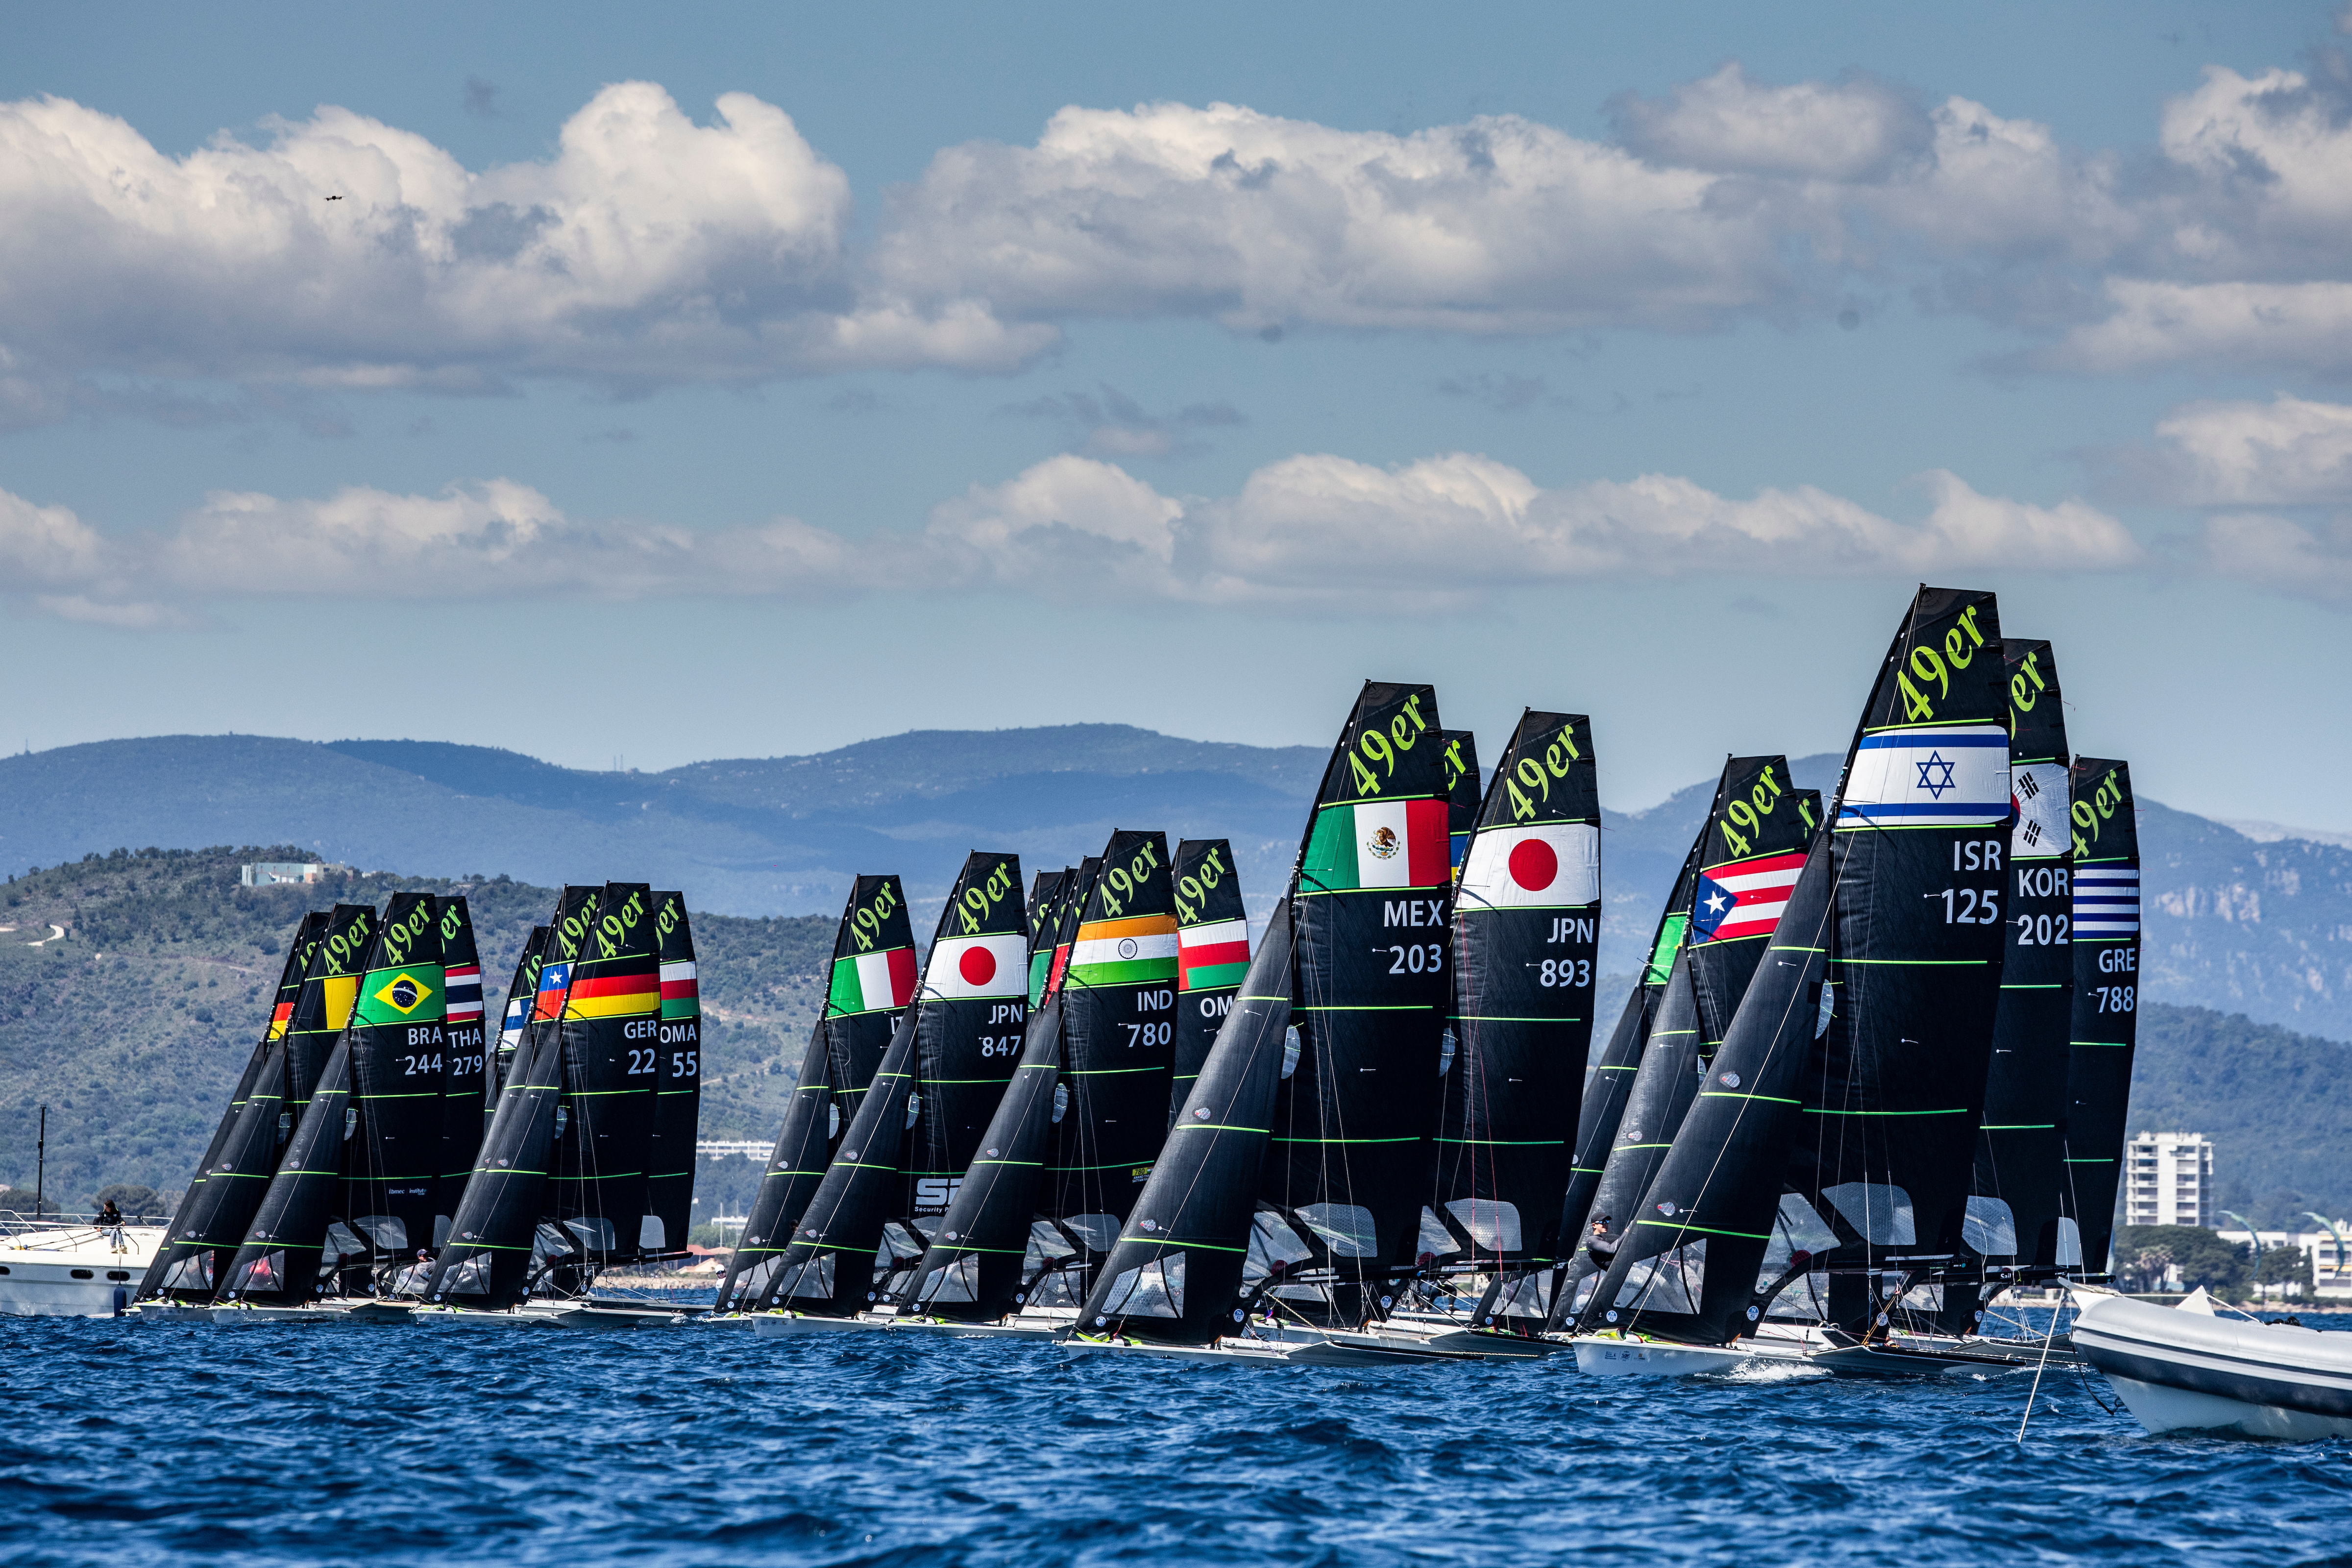  Olympic Classes  Last Chance Regatta  Hyeres FRA  Day 1  Elena Lengwiler SUI in the lead